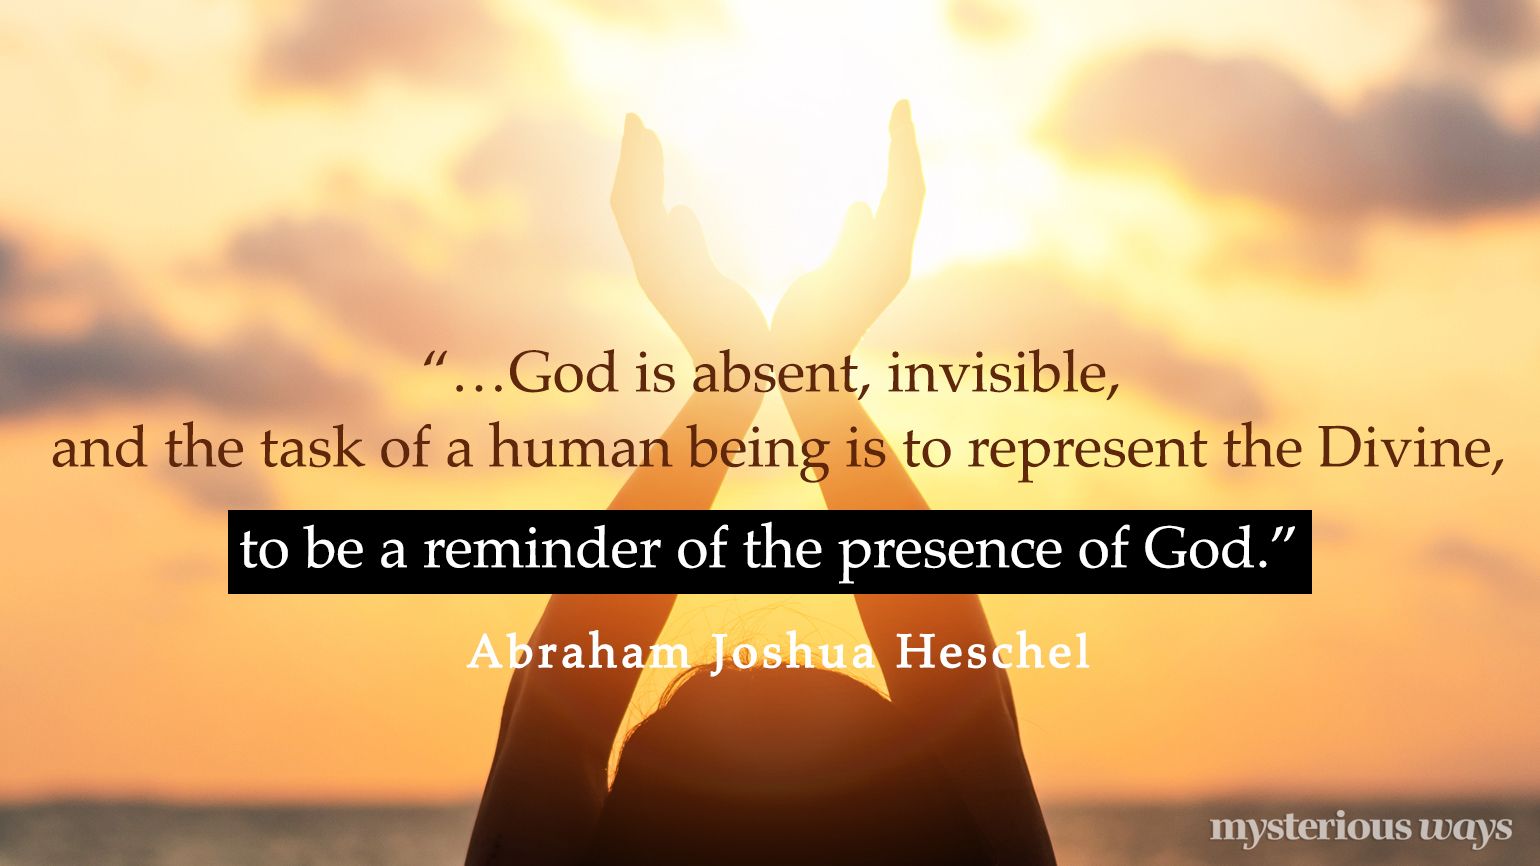 “…God is absent, invisible, and the task of a human being is to represent the Divine, to be a reminder of the presence of God.”